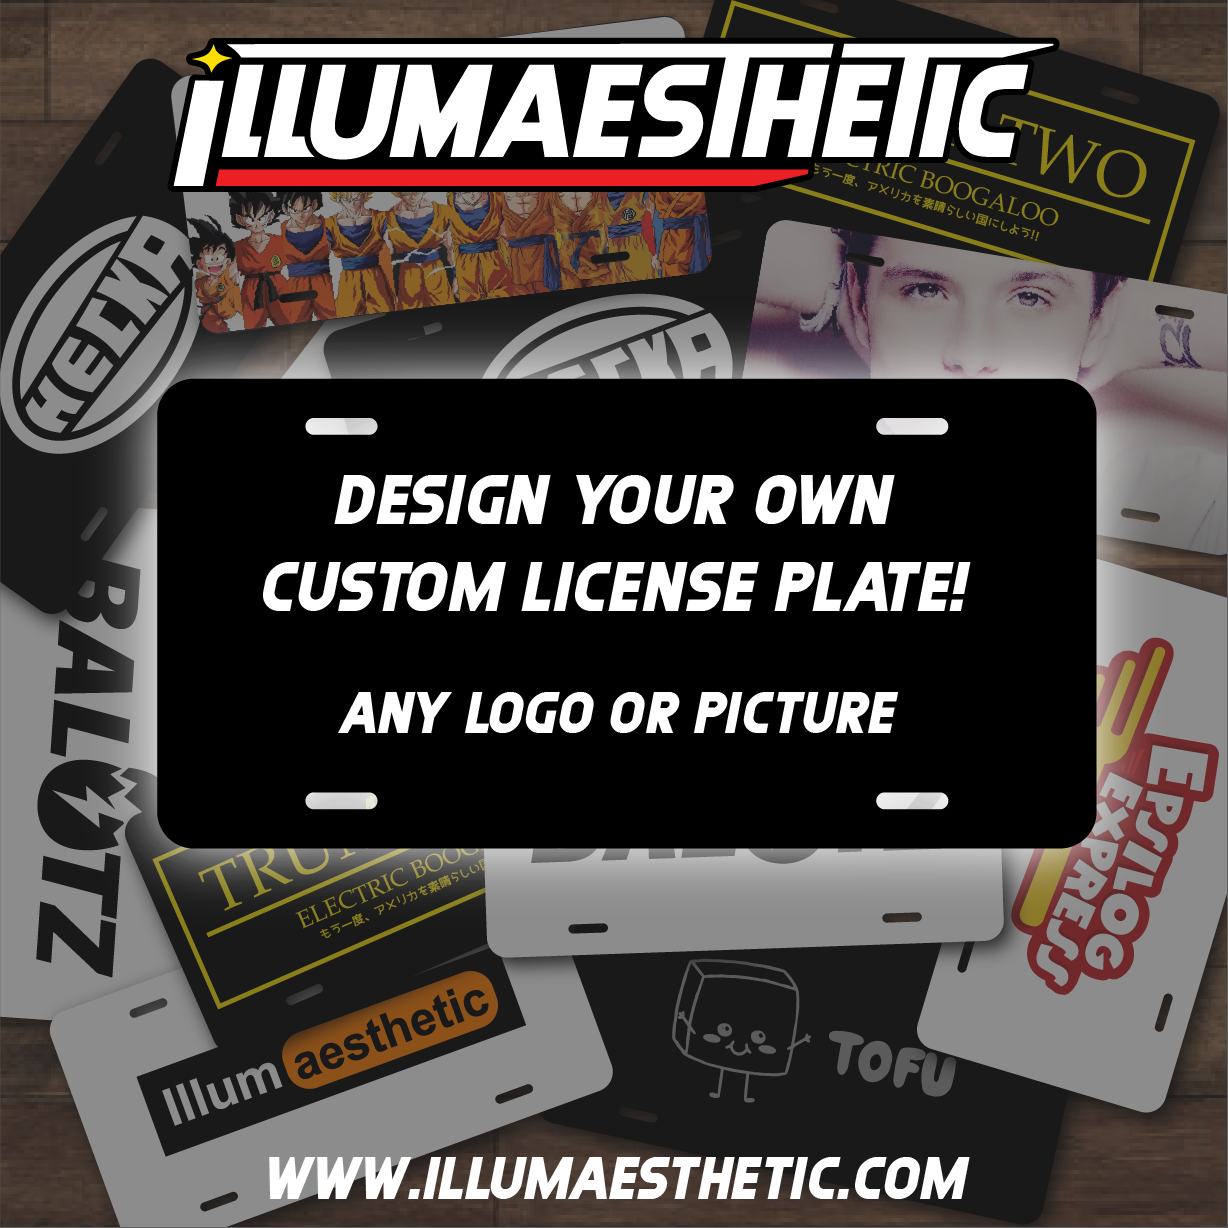 Design Your Own Custom Display License Plate